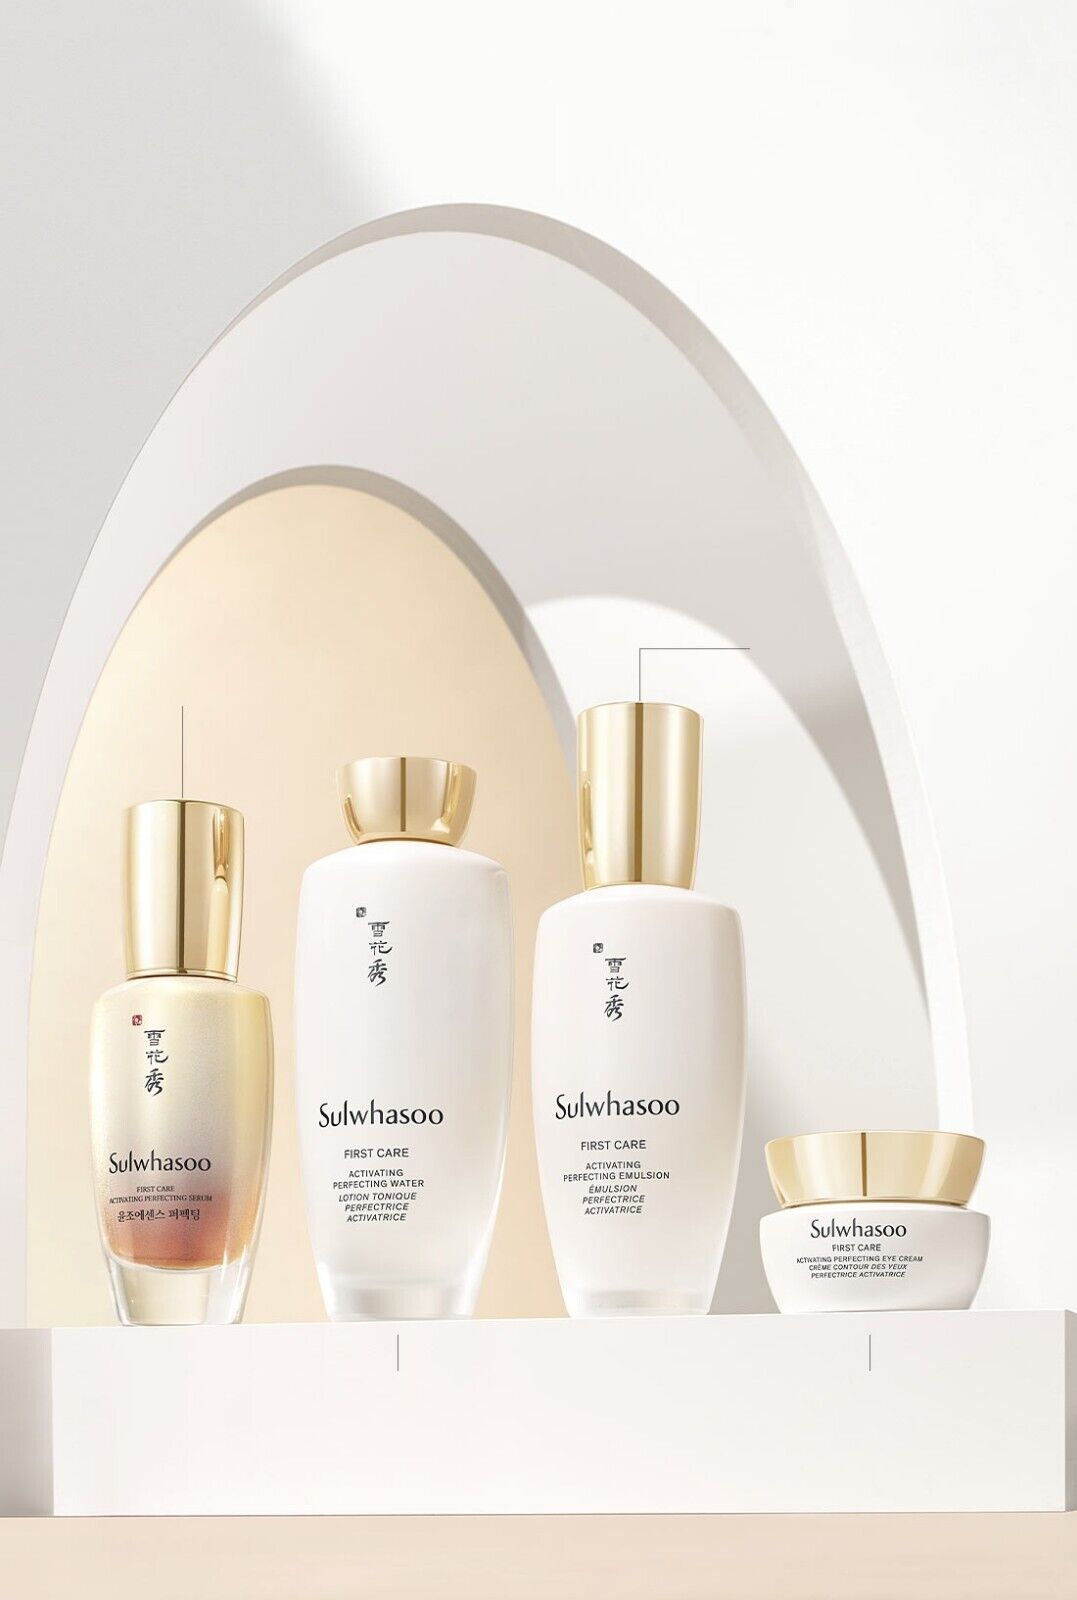 Sulwhasoo First Care Activating Perfecting Duo Set/Toner+Emulsion/Wedding Gift Y